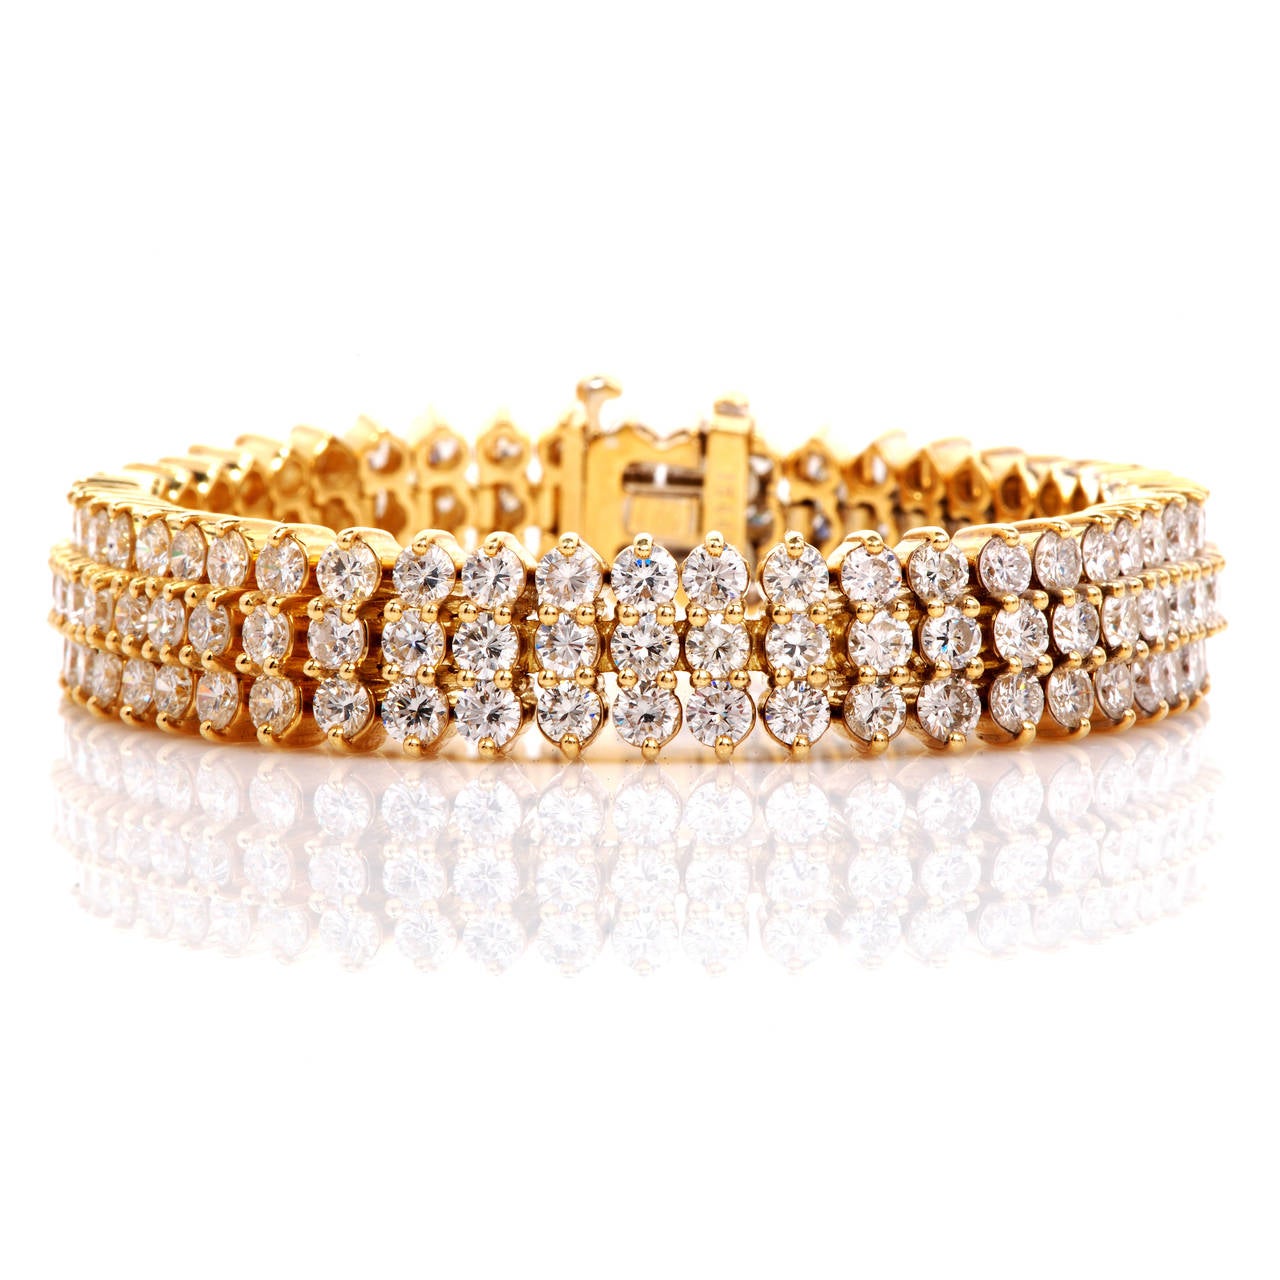 This stunning Jose Hess Diamond bracelet is finely crafted in solid 18K yellow gold. This bracelet is accented with some 144 genuine round cut diamonds approx 25.00ct, G color, VS1 clarity, prong set. With an security insert clasp, this flexible